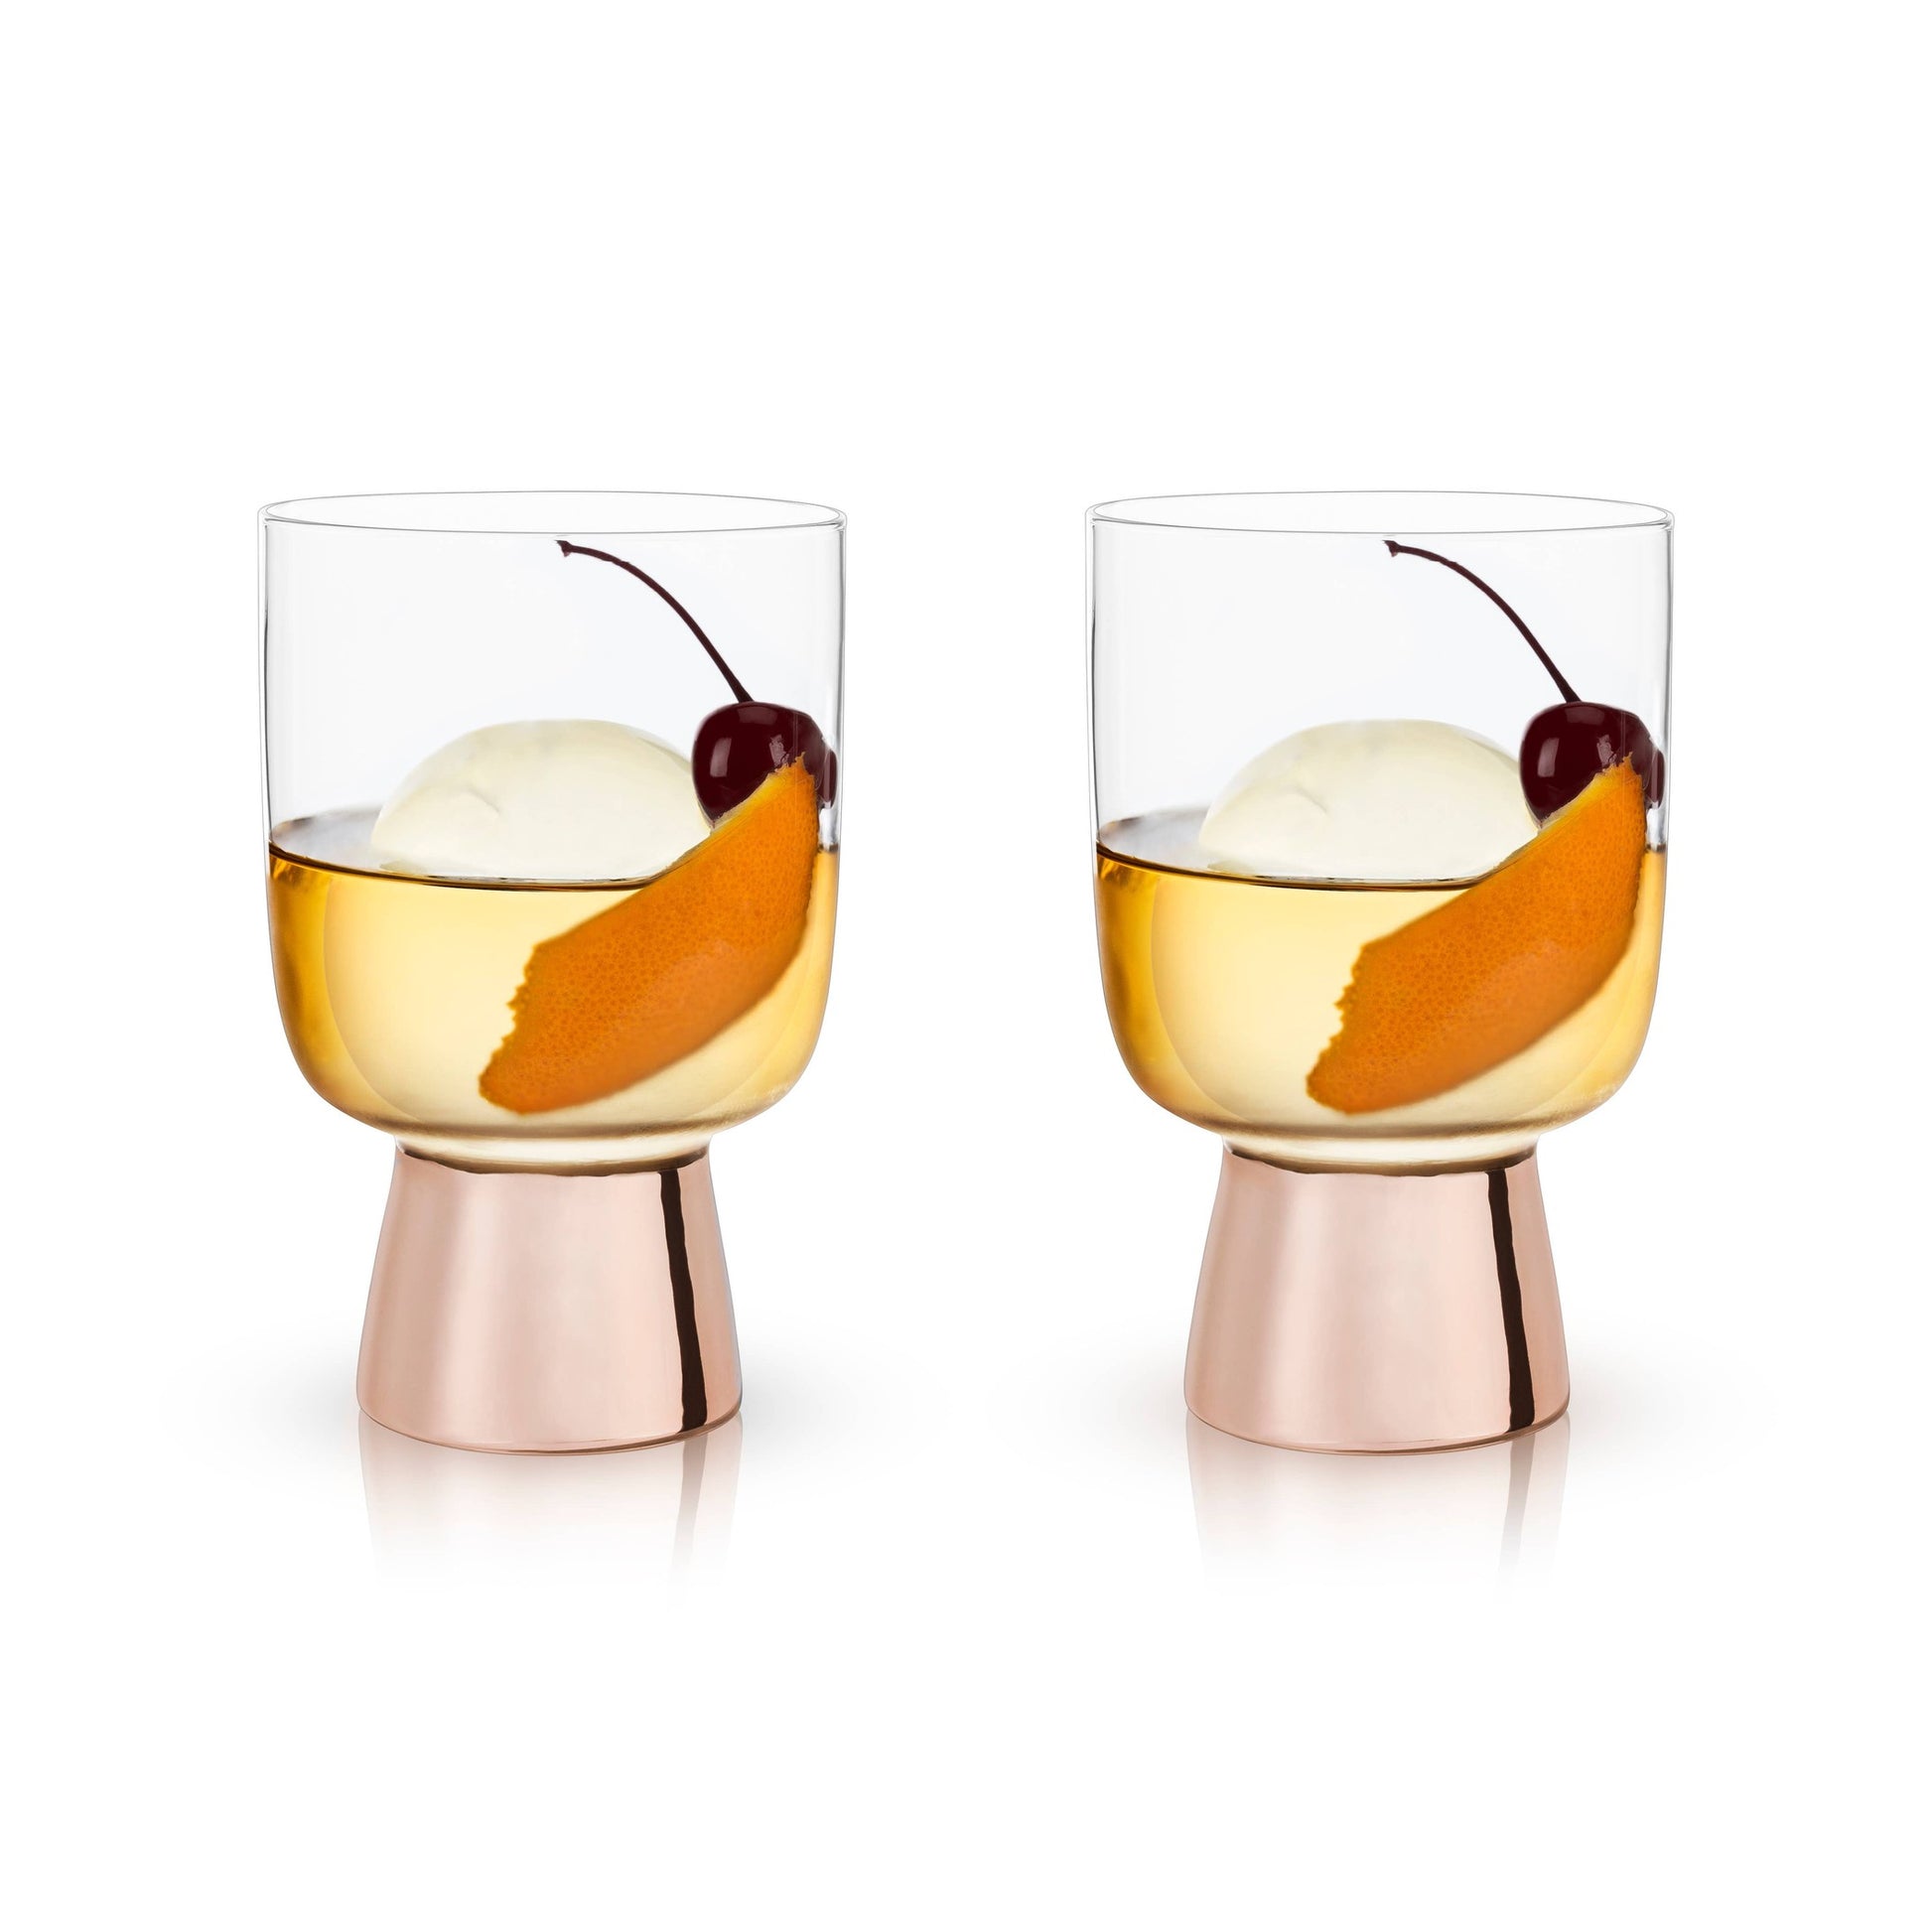 Set of 2 Raye Copper Footed Cocktail Tumblers in Gift Box